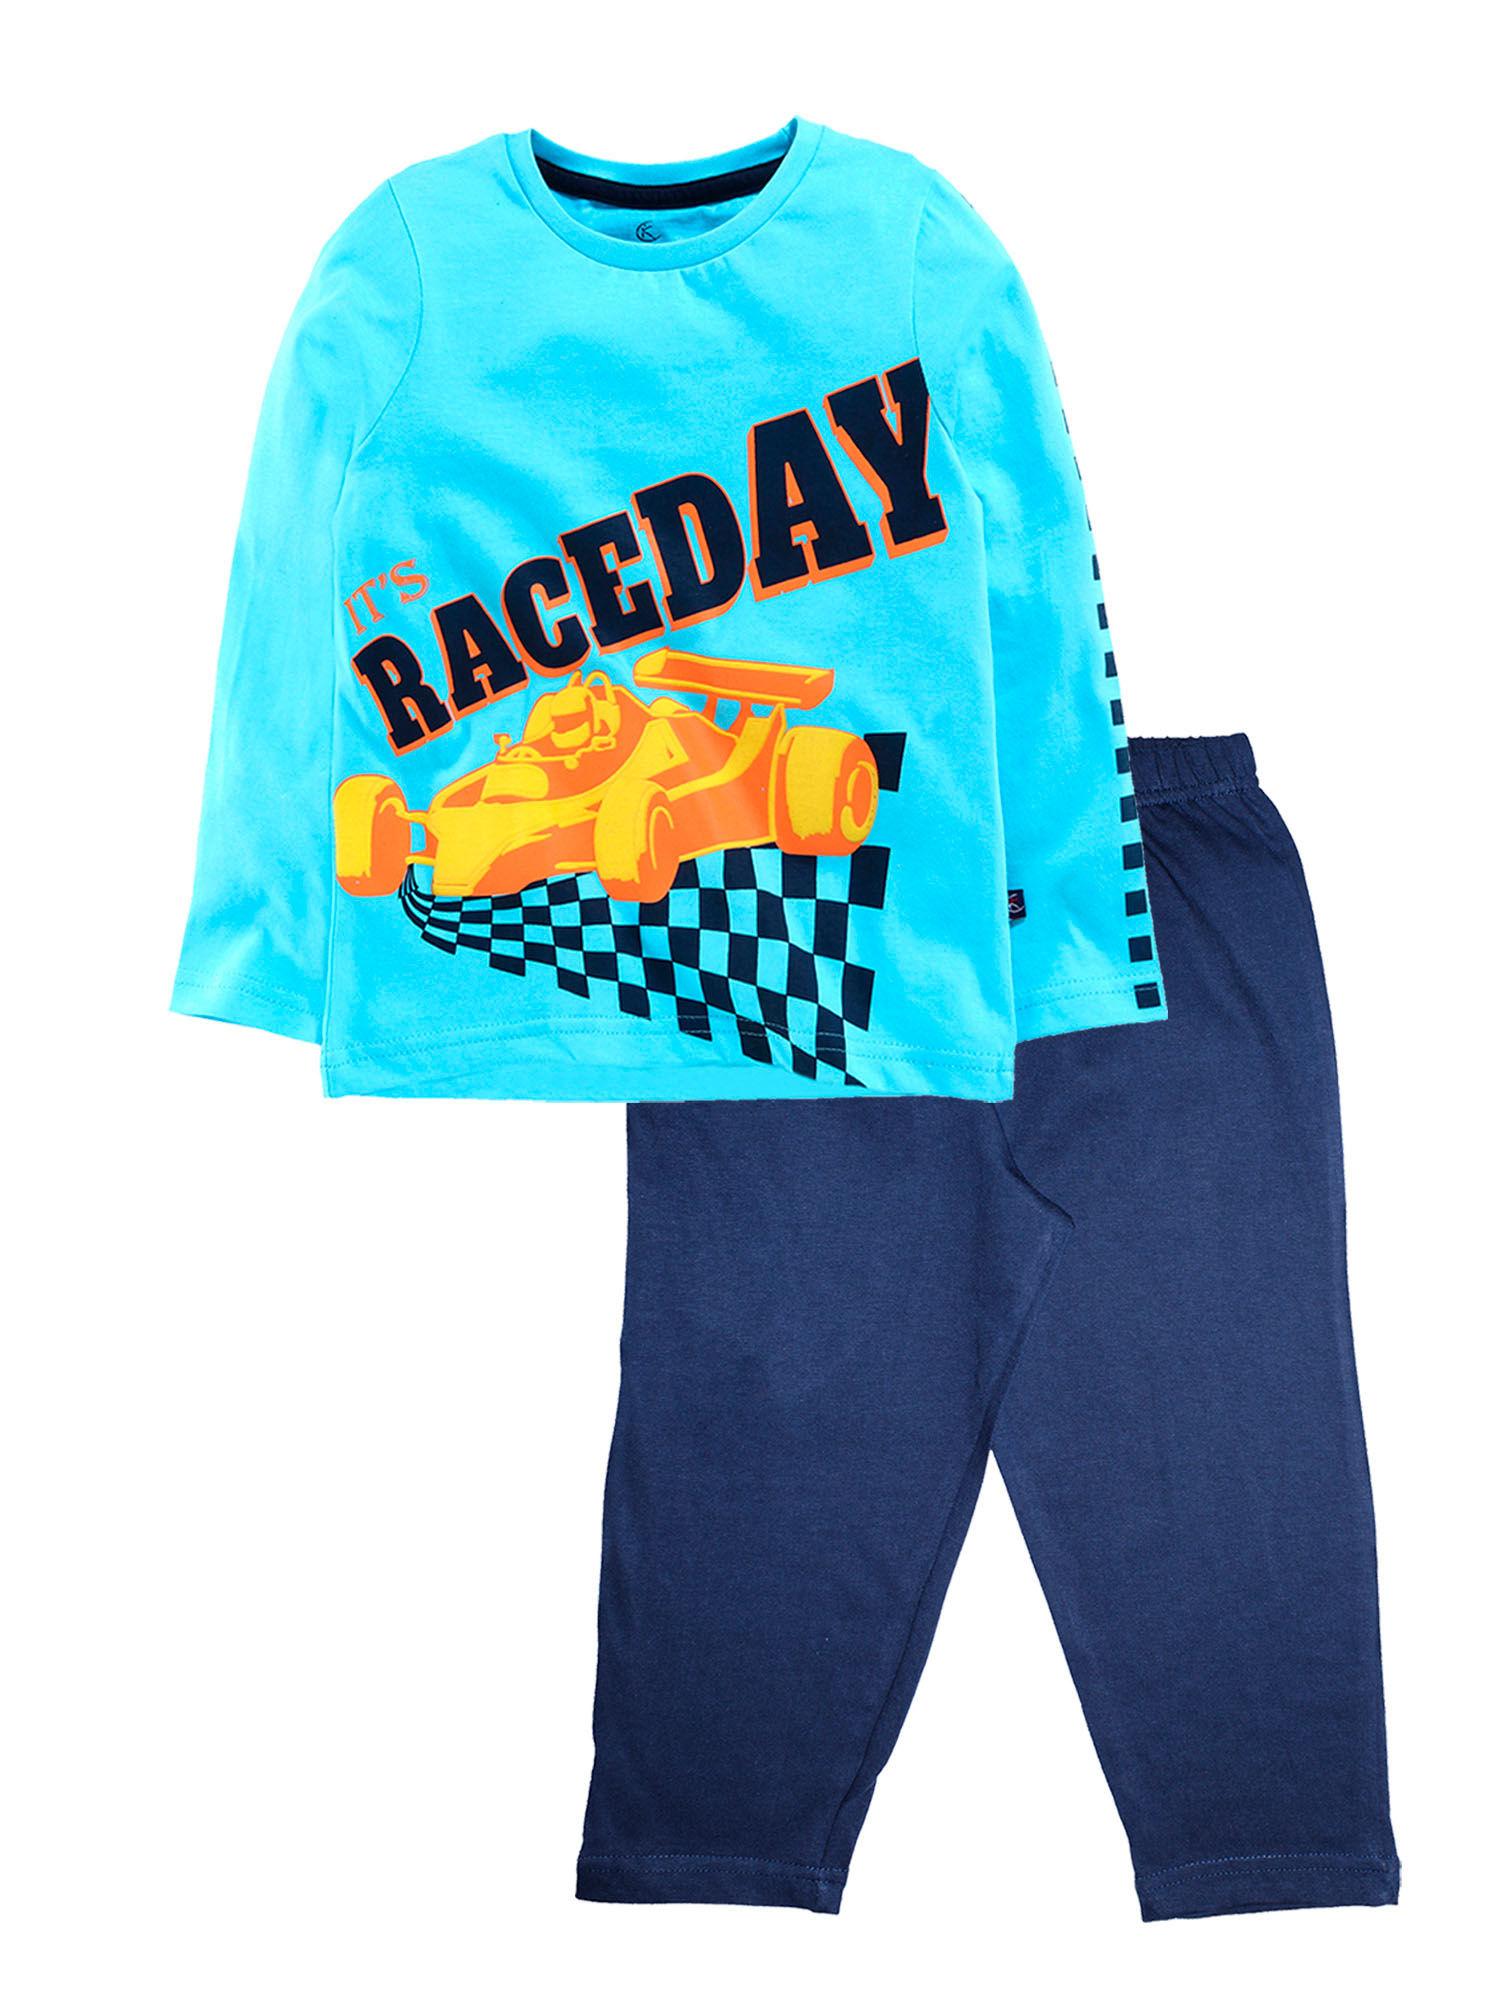 lt blue f1 and navy full sleeve f1 race day print tee and pyjama (set of 2)